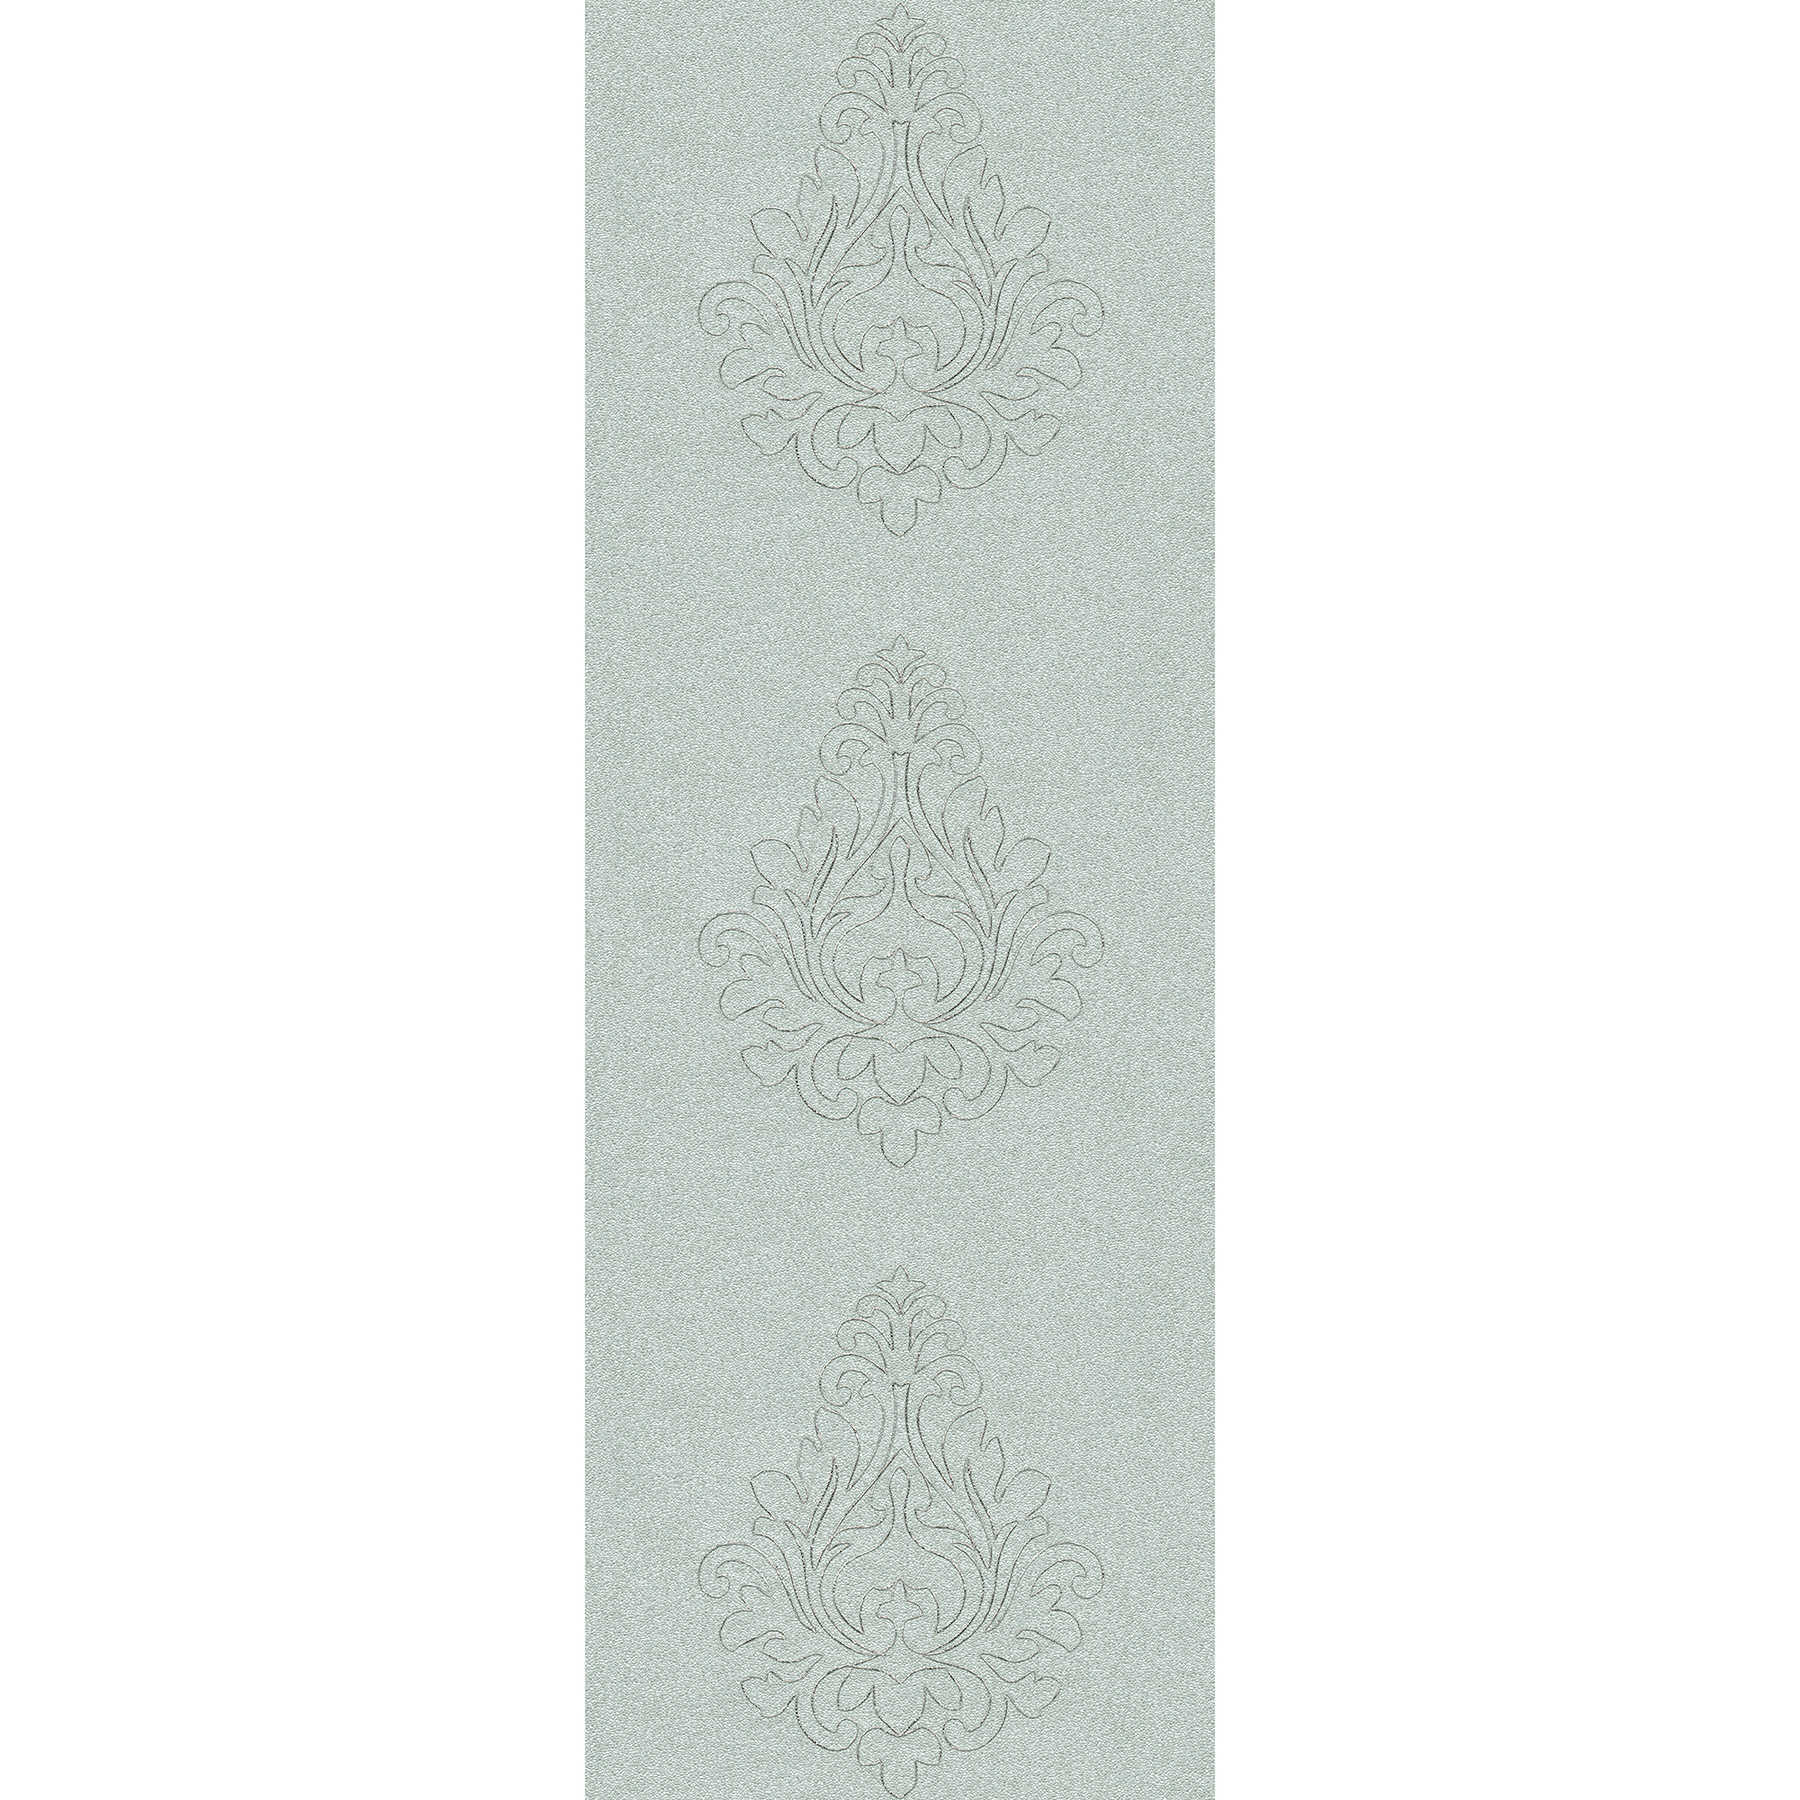         Premium wall panel with ornaments and strong structure - grey, silver
    